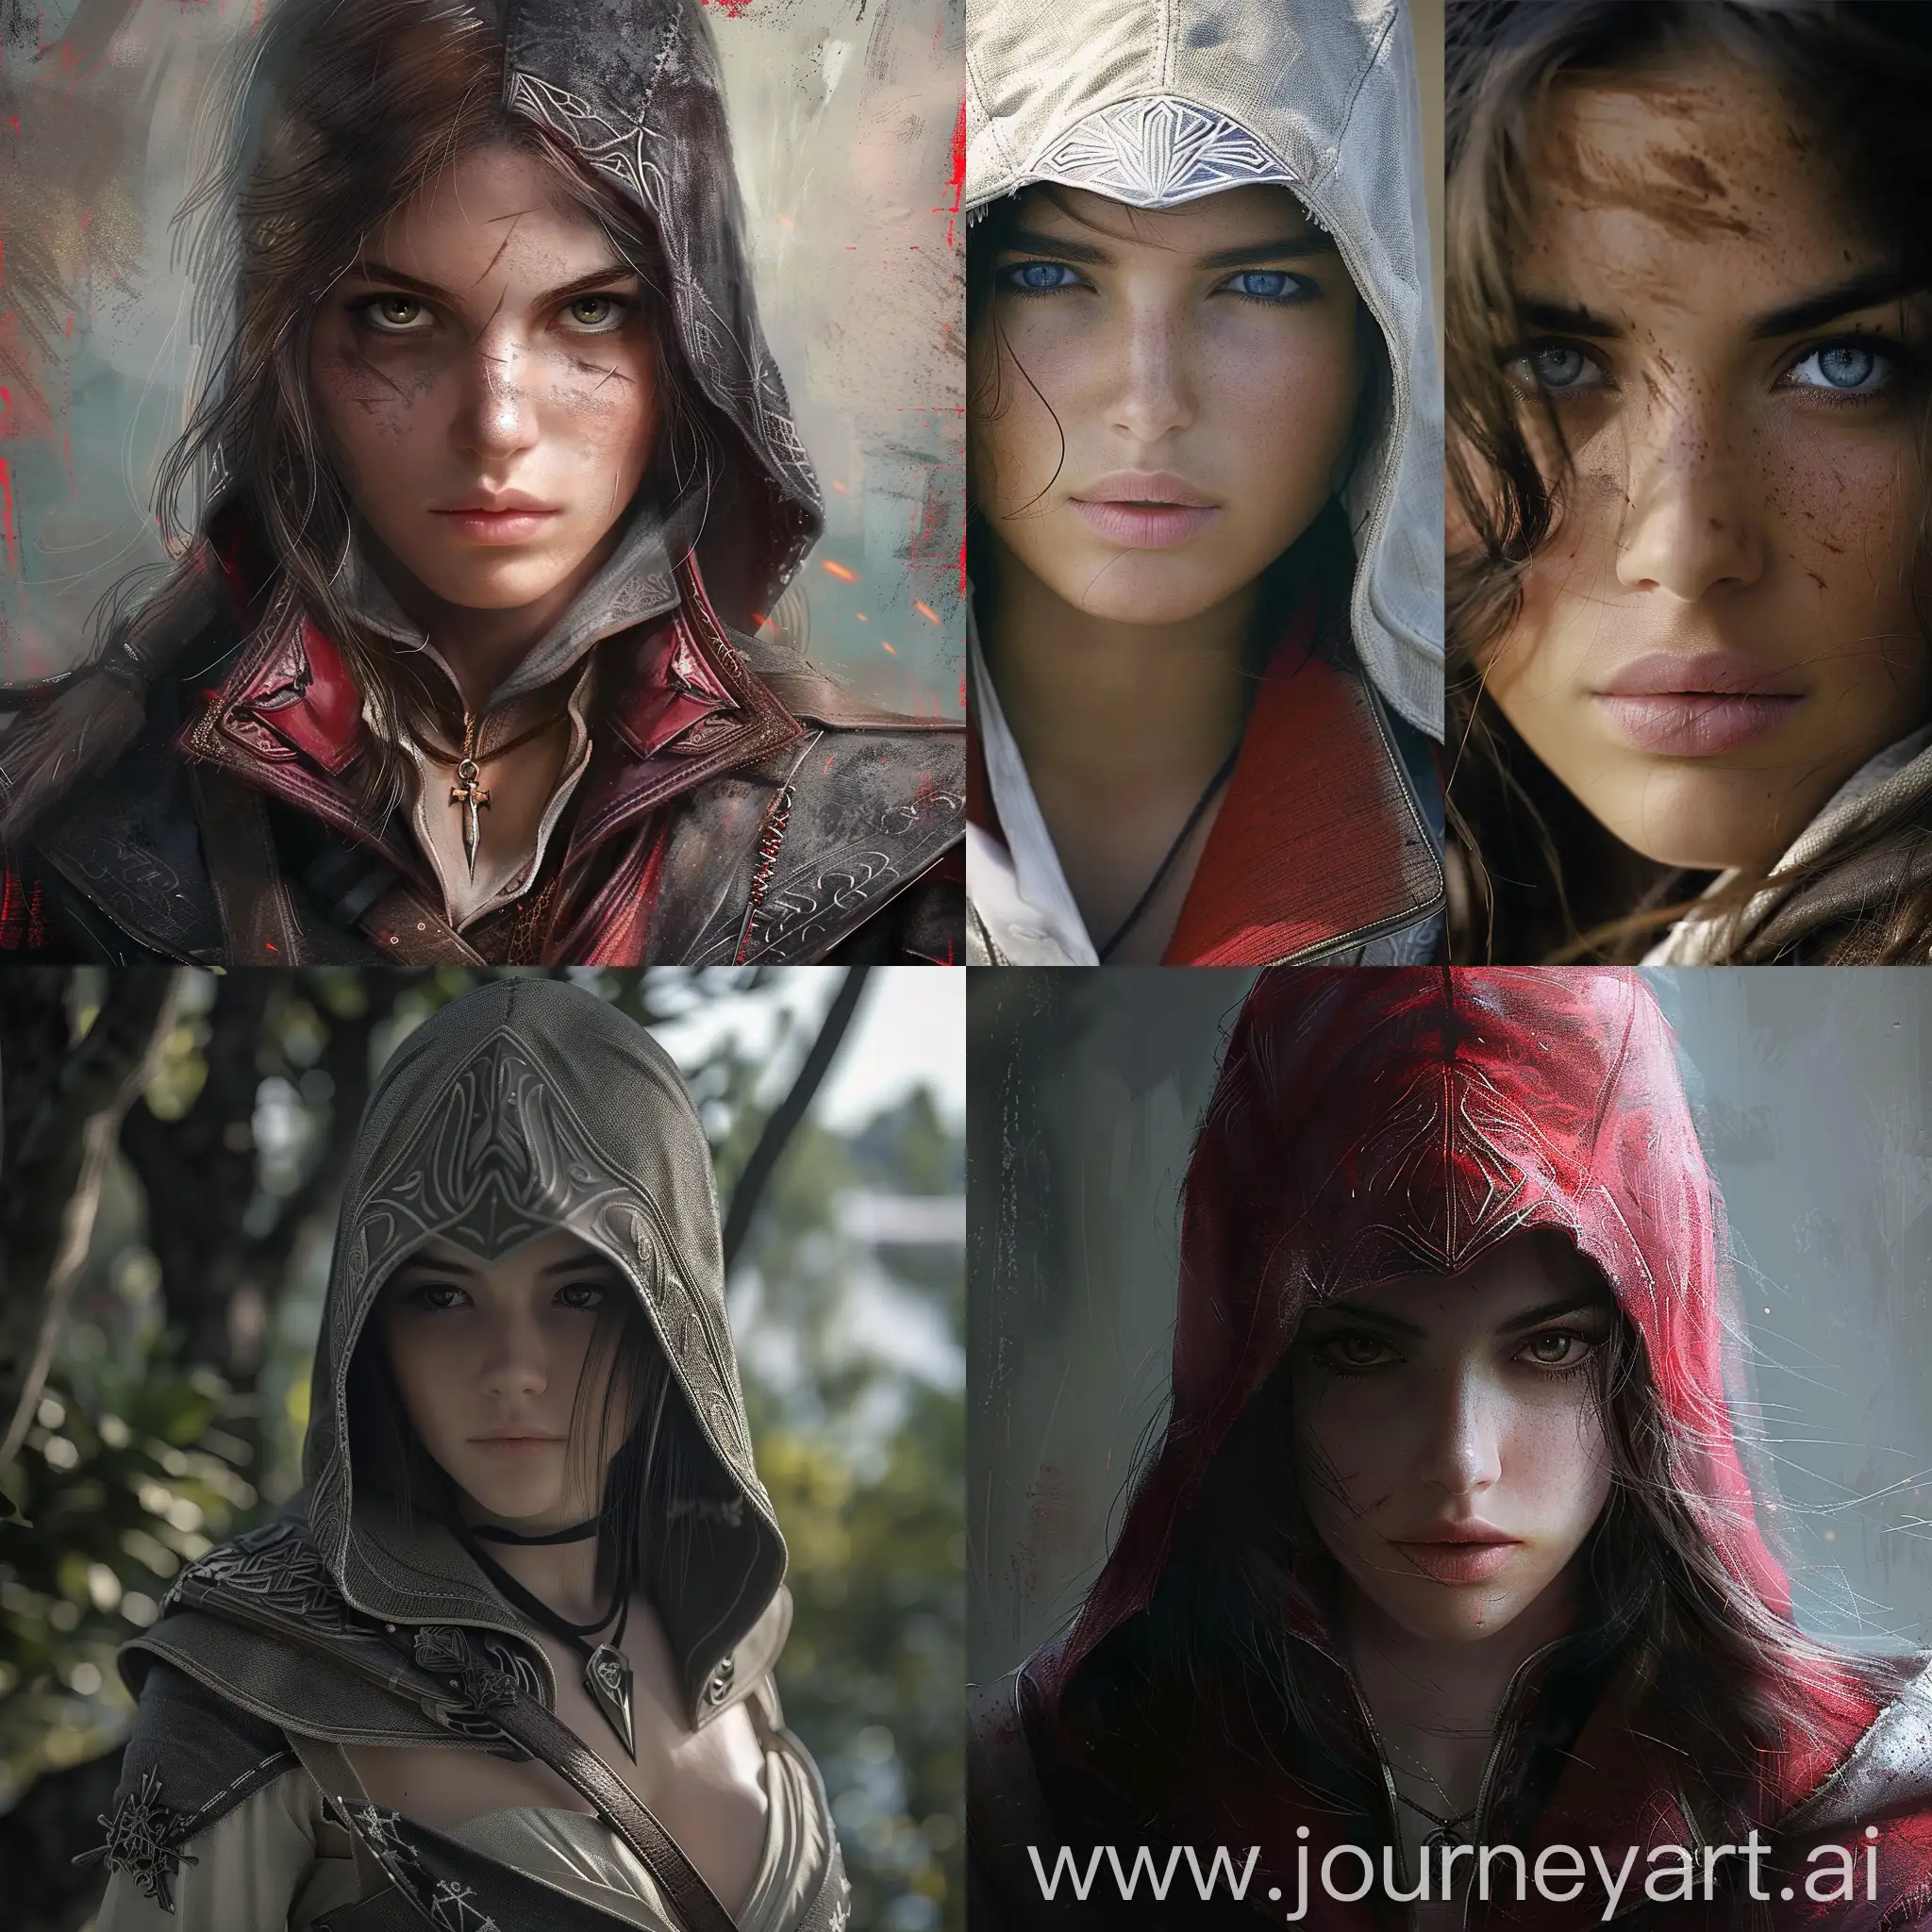 Girl,18 old years, assassin creed 